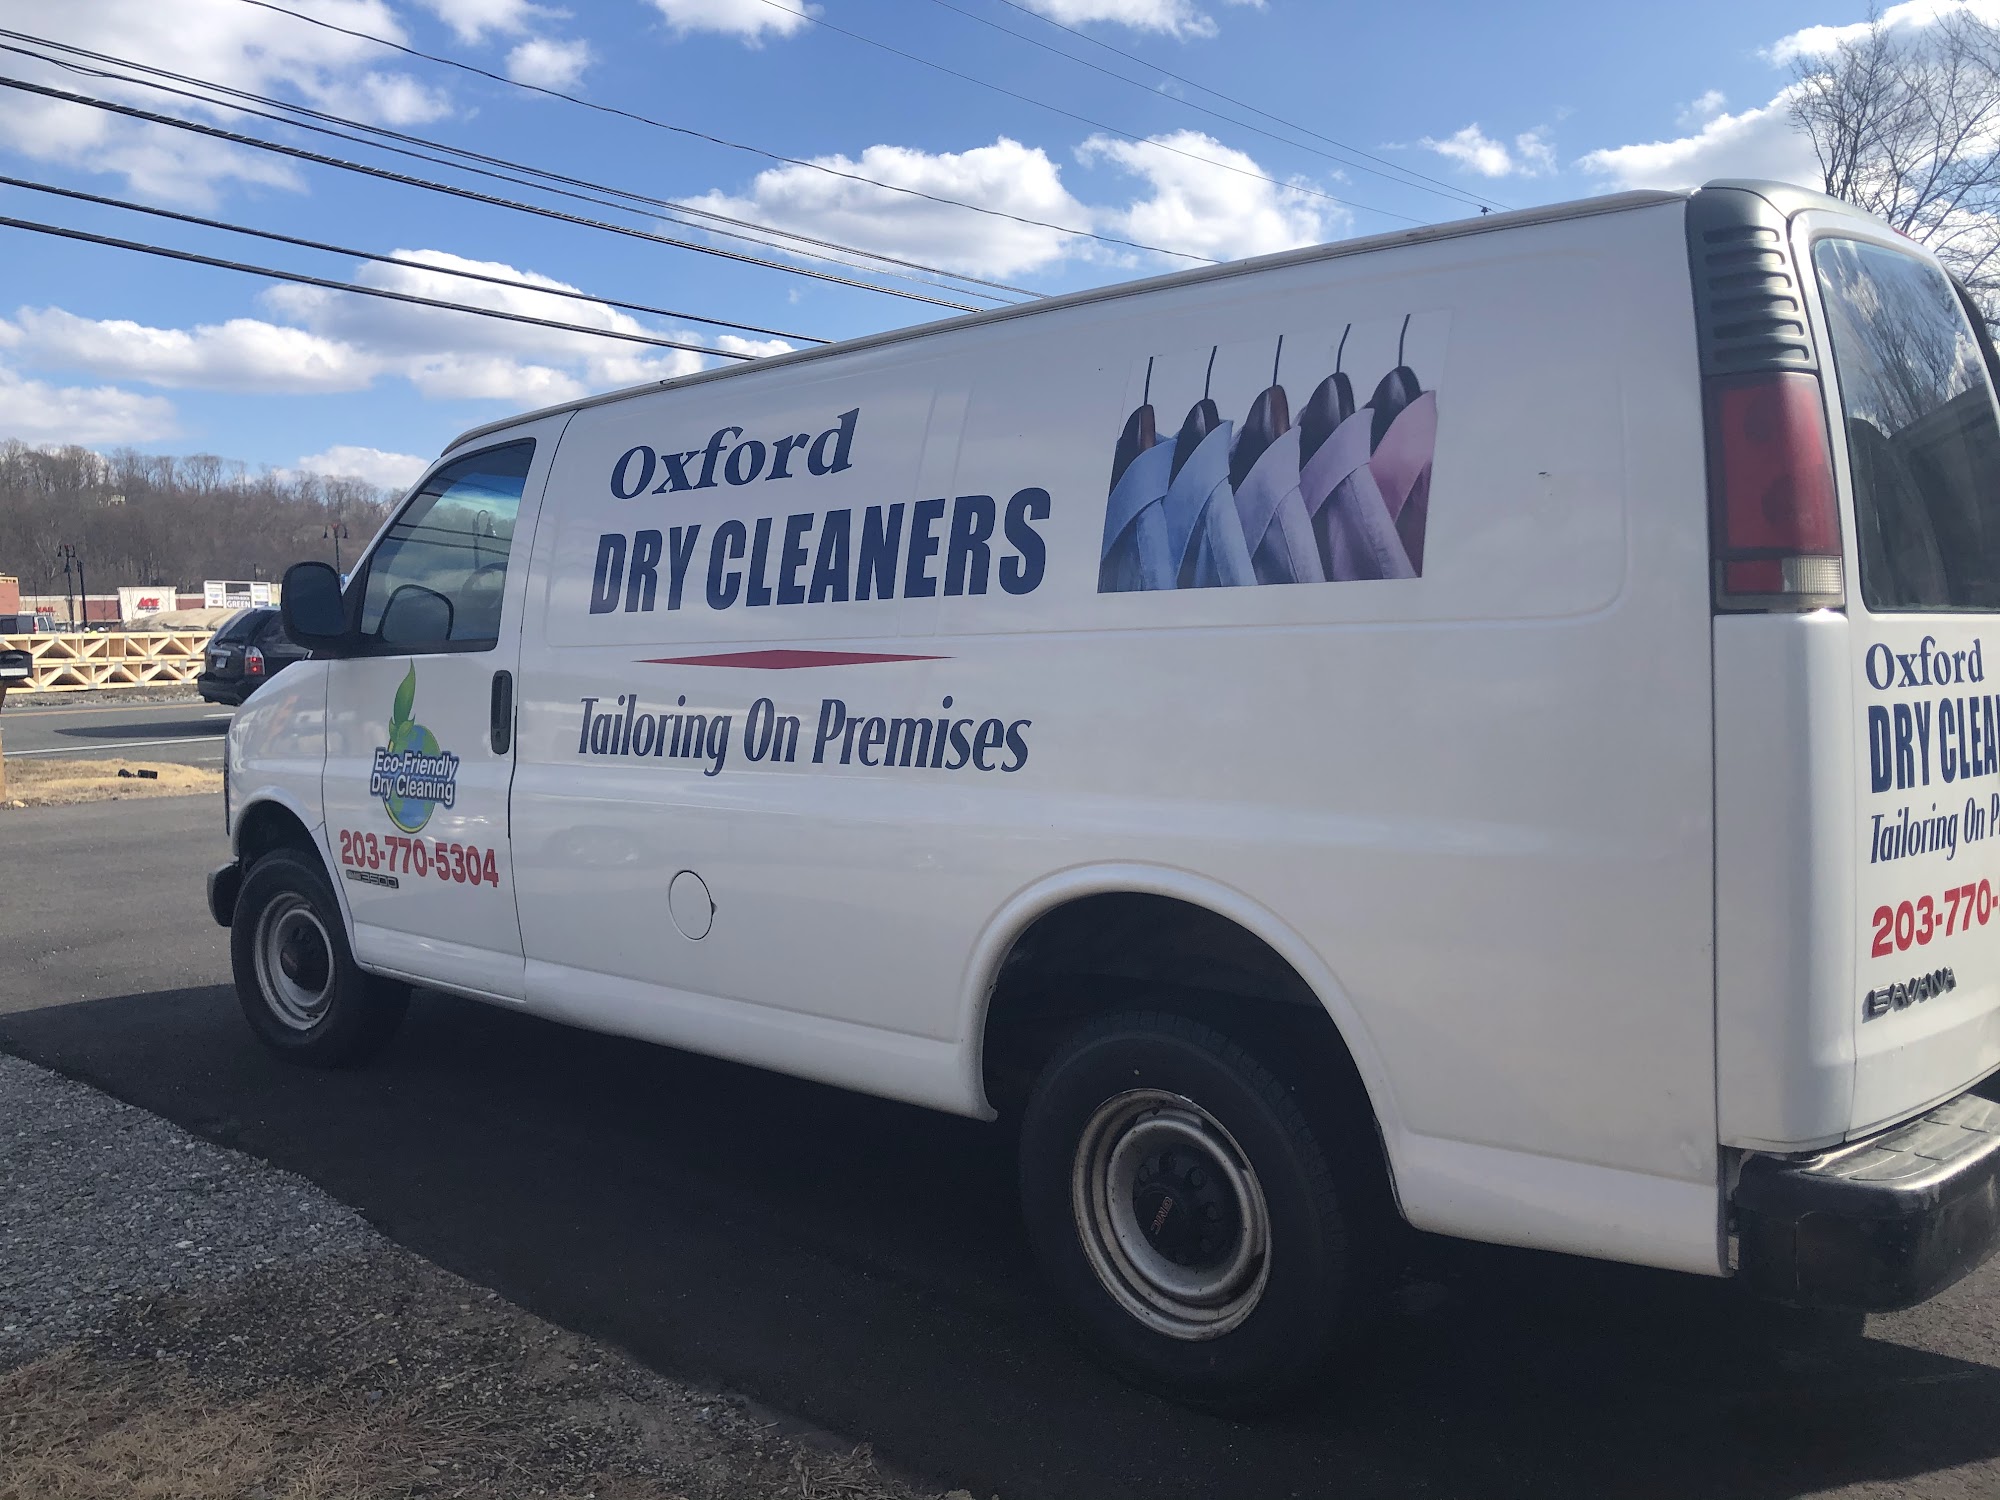 Oxford Dry Cleaners & Laundry Company